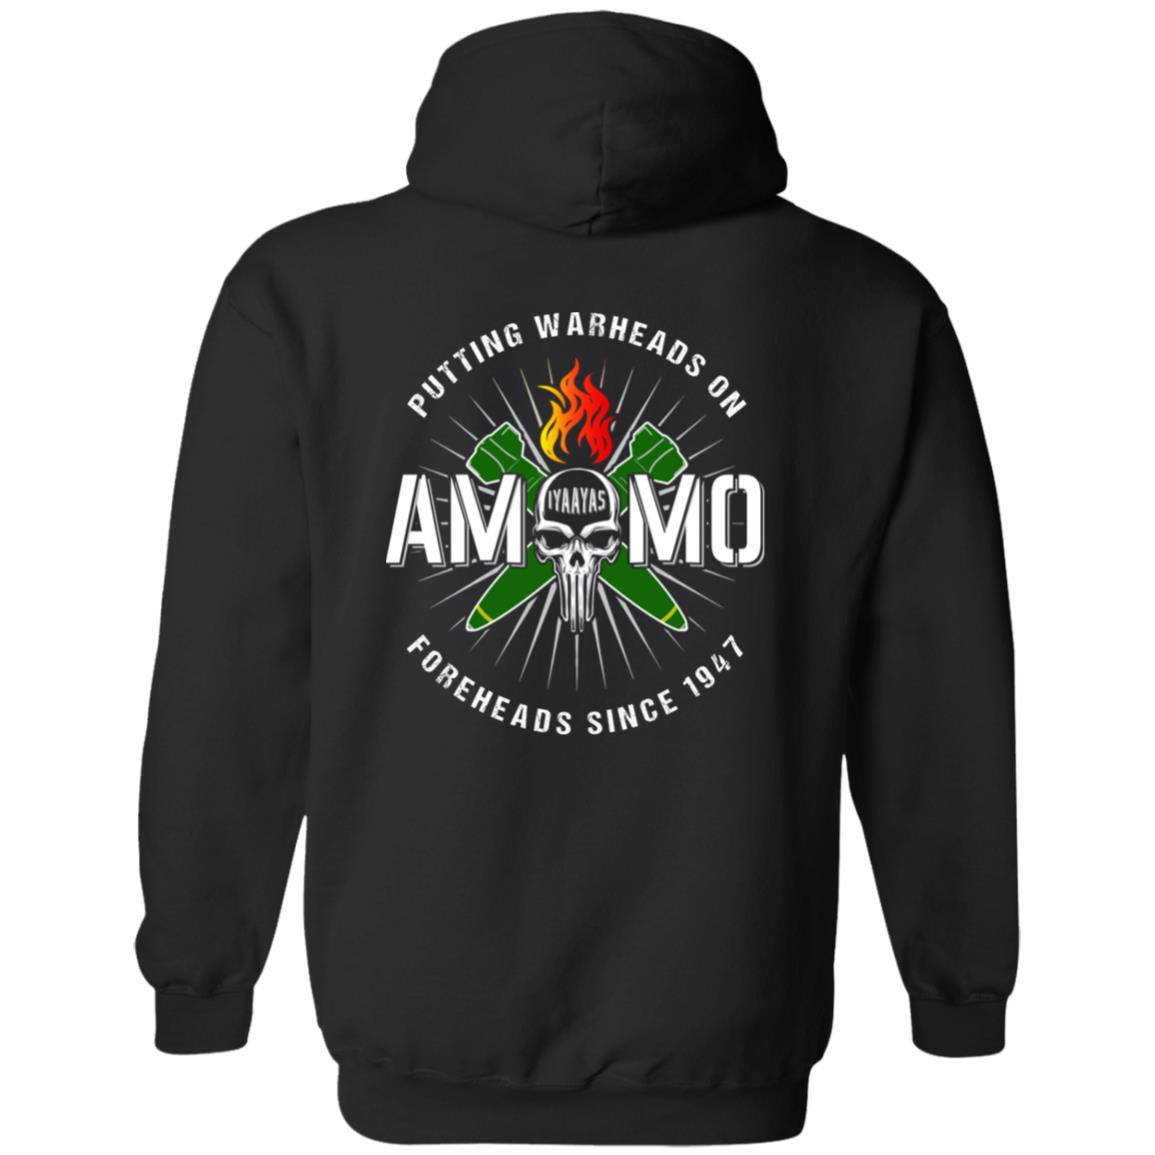 AMMO Skull Flaming Pisspot Crossed MK-84s IYAAYAS Putting Warheads On Foreheads Munitions Heritage Gift Unisex Pullover Hoodie